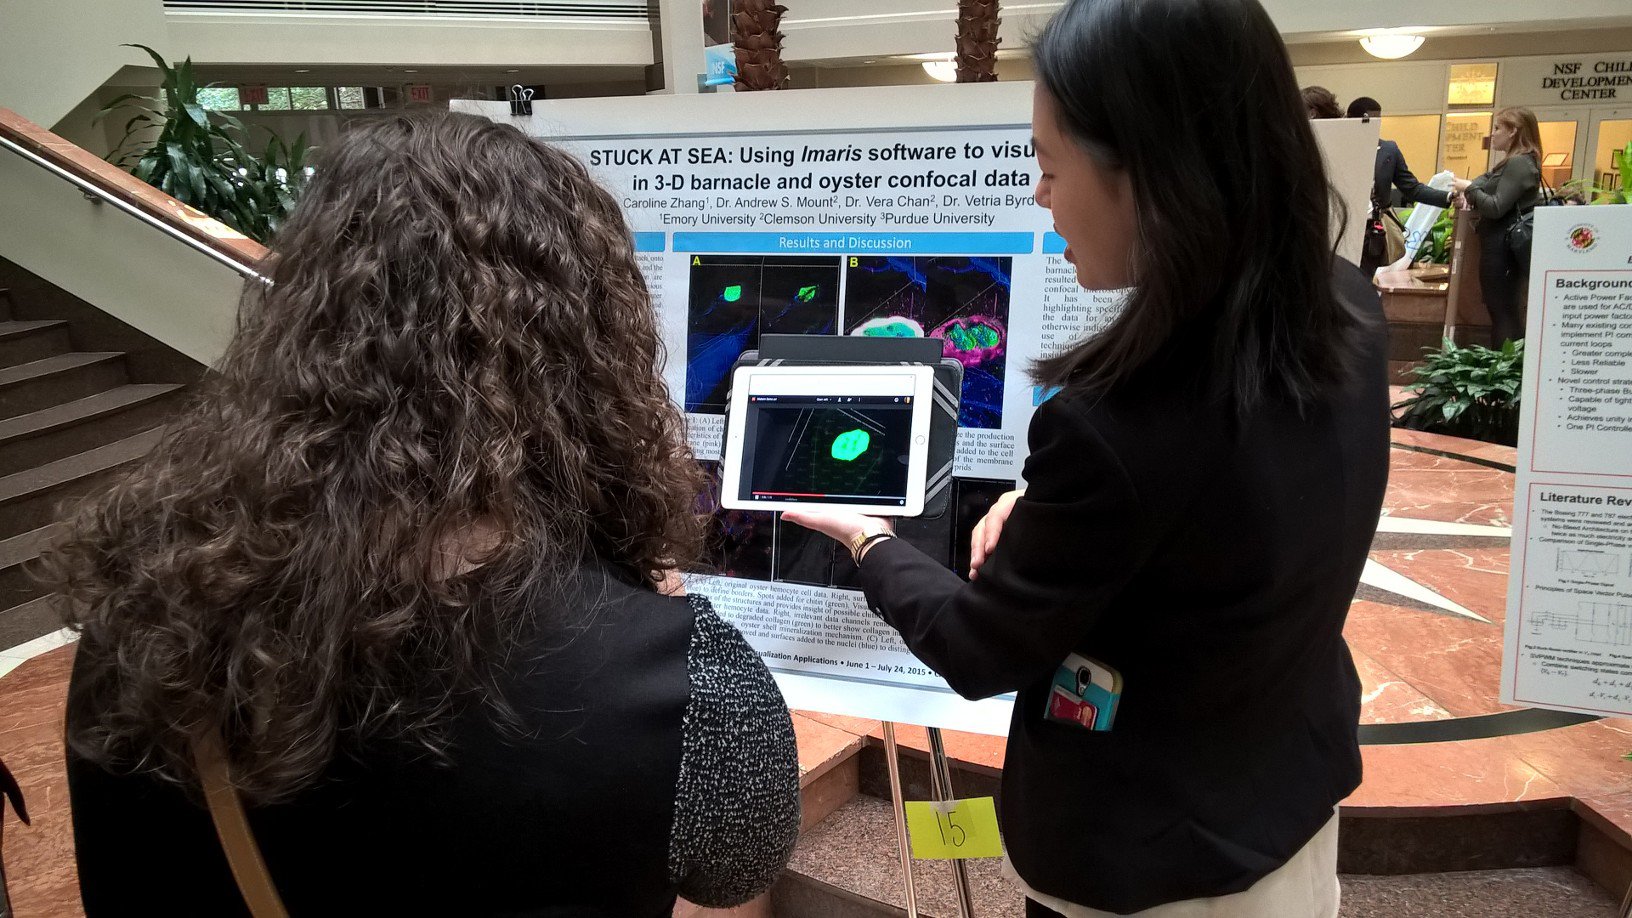 Caroline Zhang presents her research at NSF on Oct. 26, 2015.